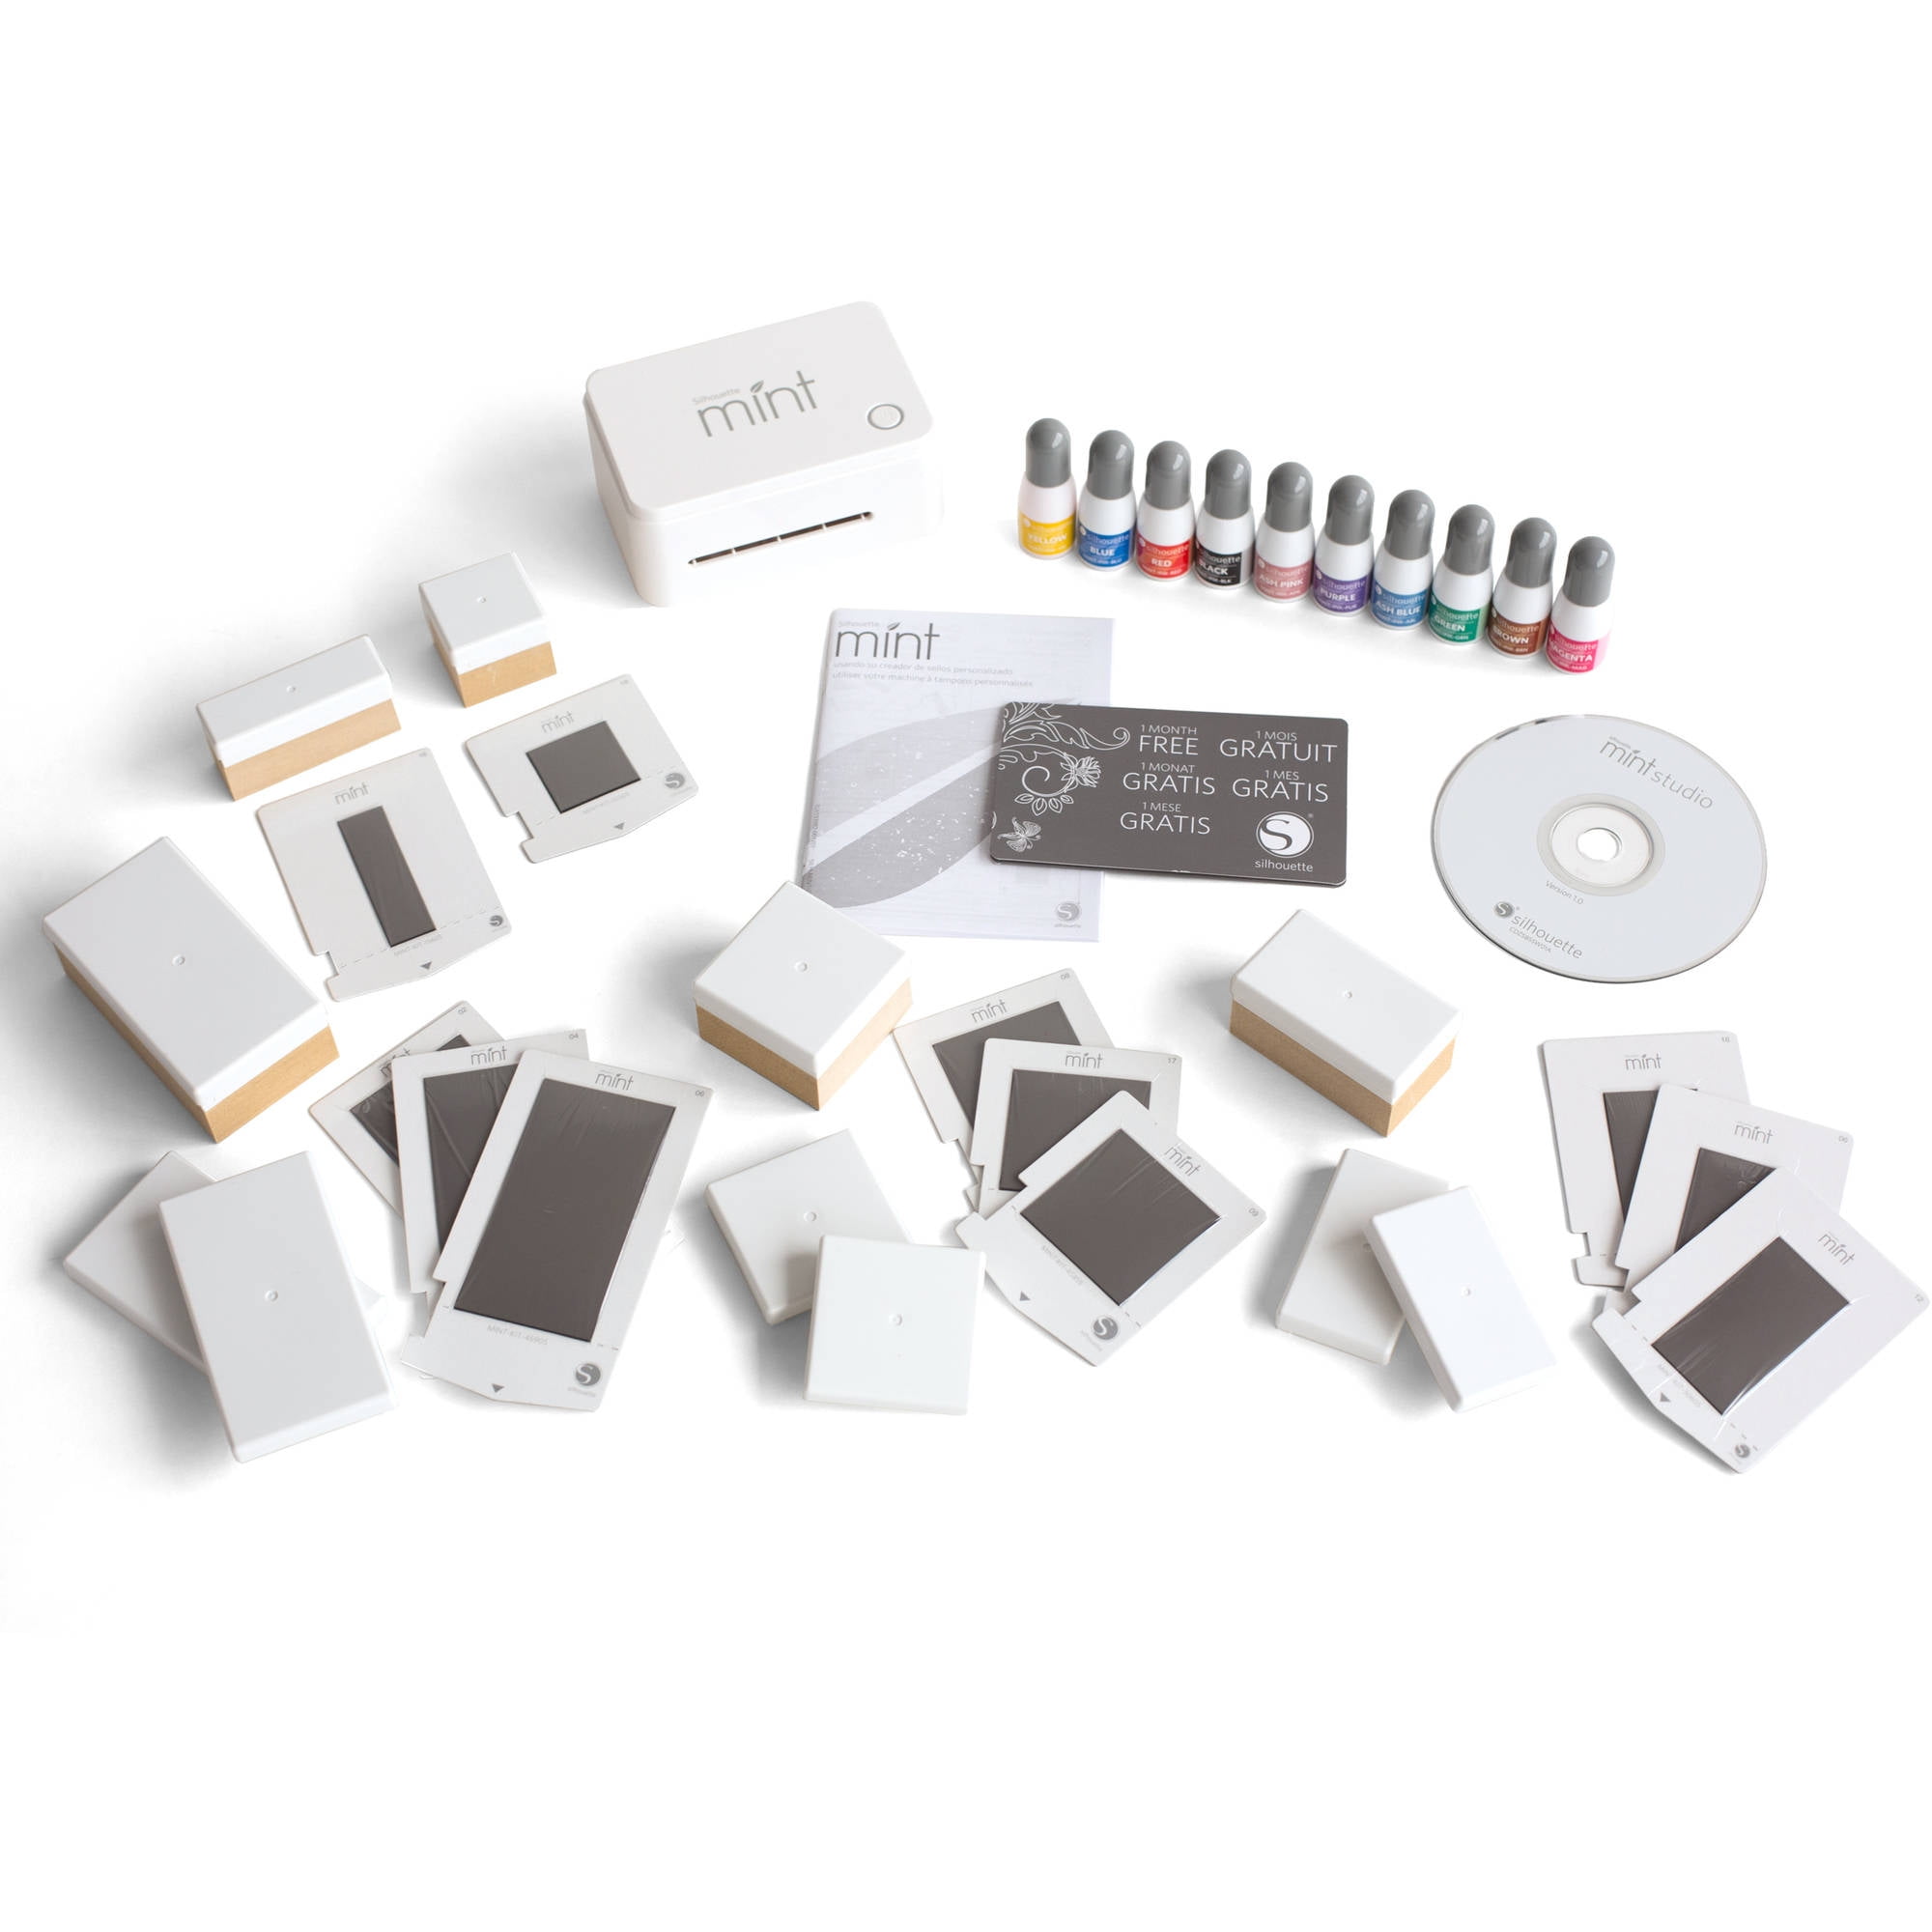 Silhouette Mint: Stamp maker guide